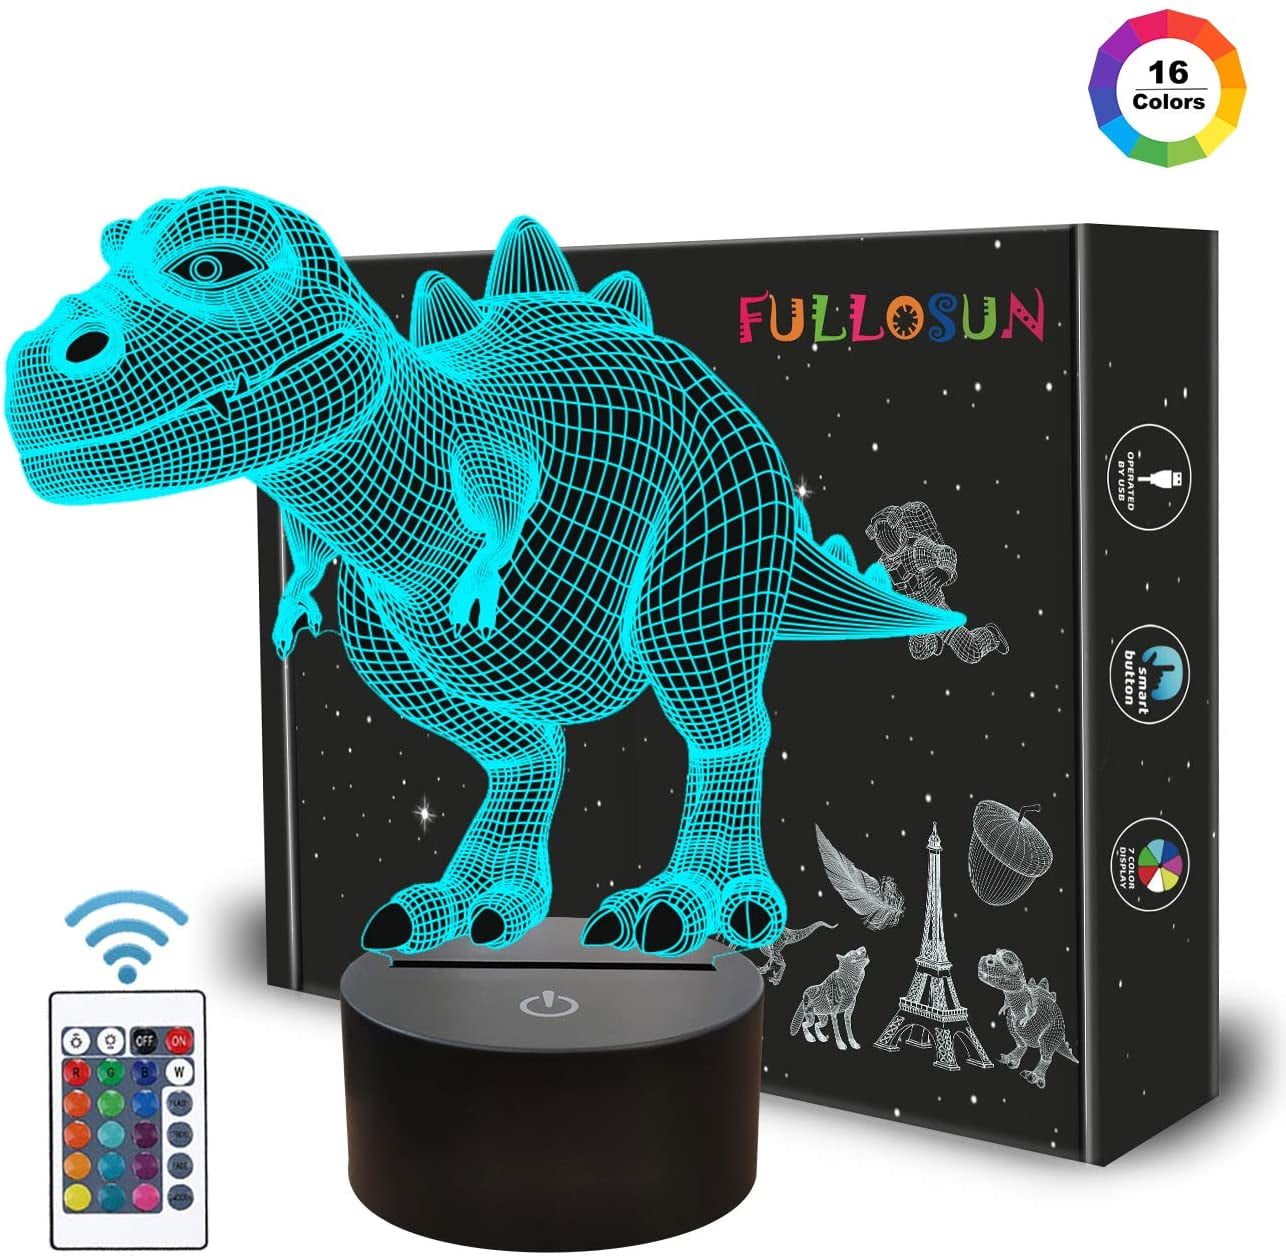 Dinosaur Gifts for Kids Led Dinosaur Illusion Lamp Three Pattern and 16 Color Change Decor Lamp with Remote Control for Kids 3D Dinosaur Night Light 